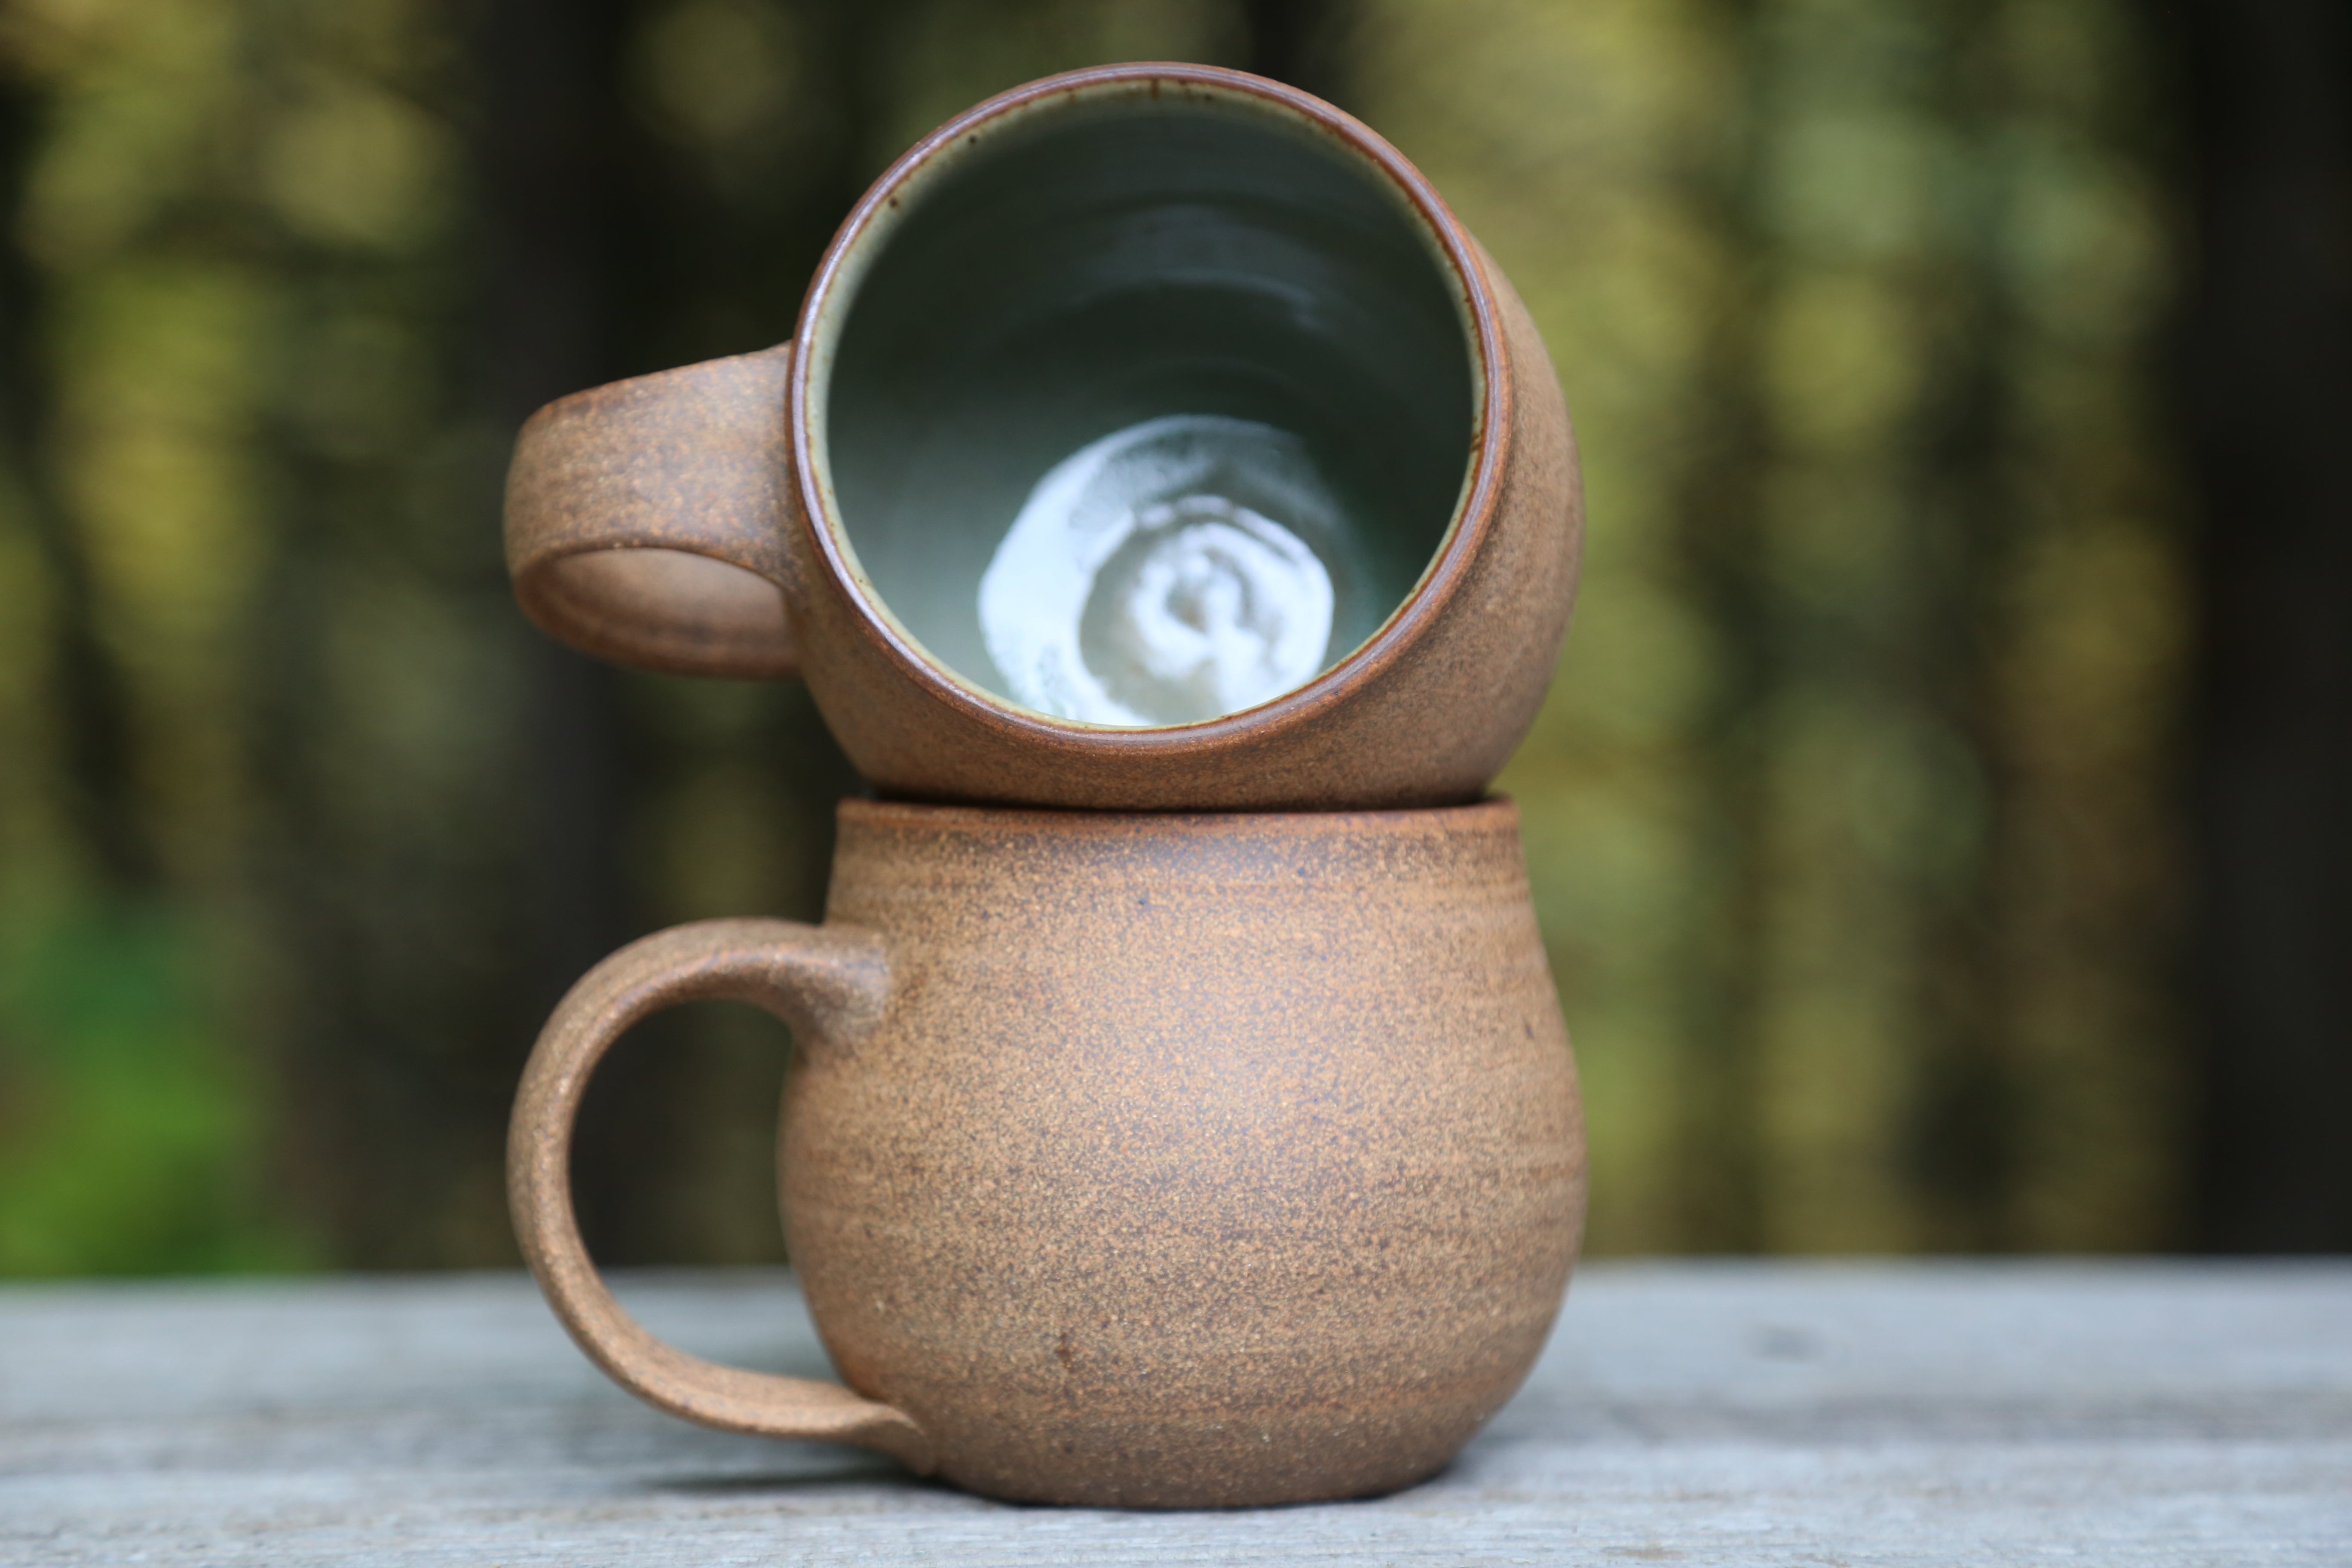 Pair of speckled bare clay mugs